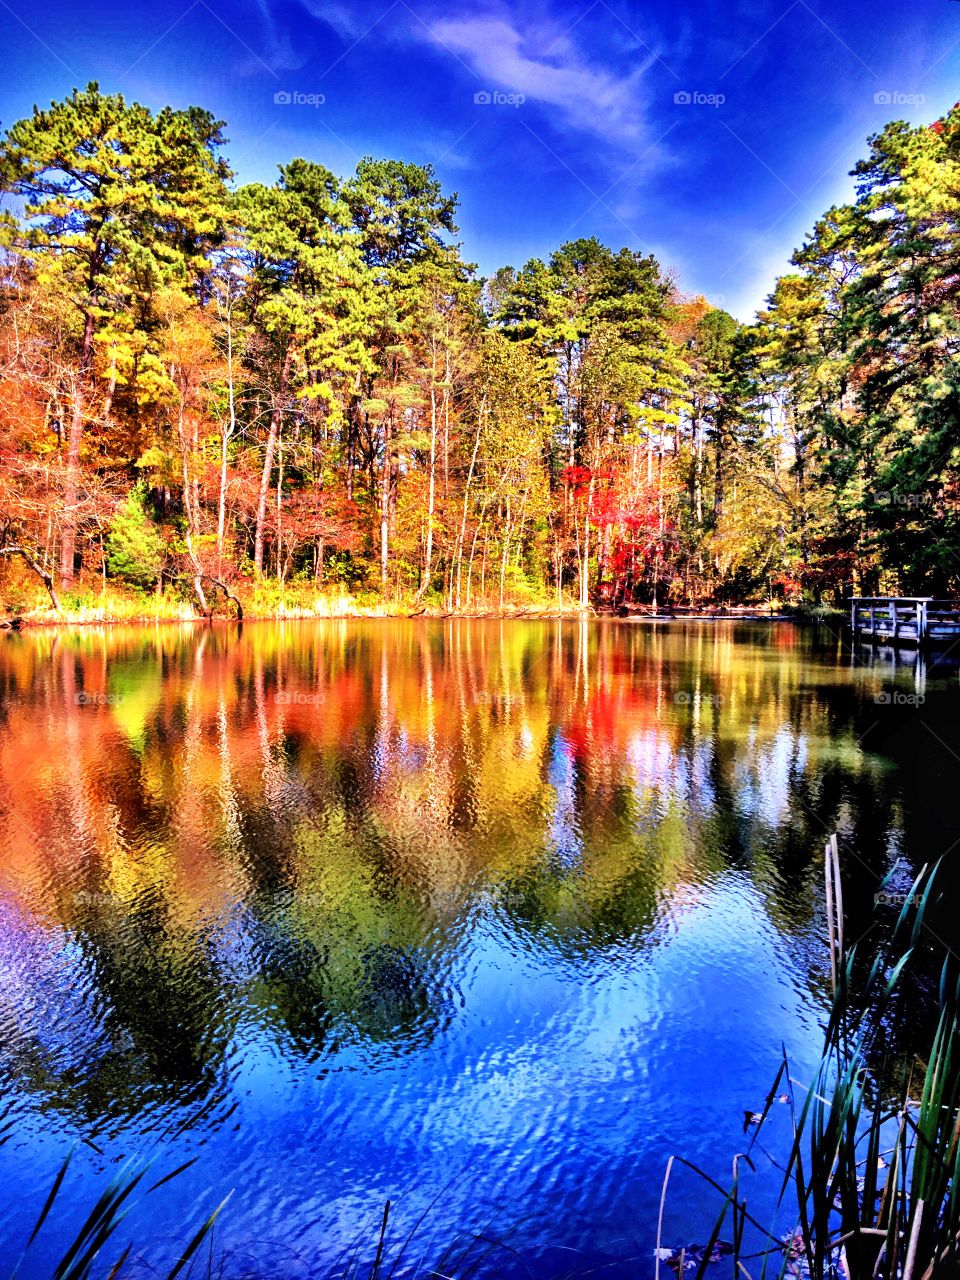 Fall and a beautiful forest lake